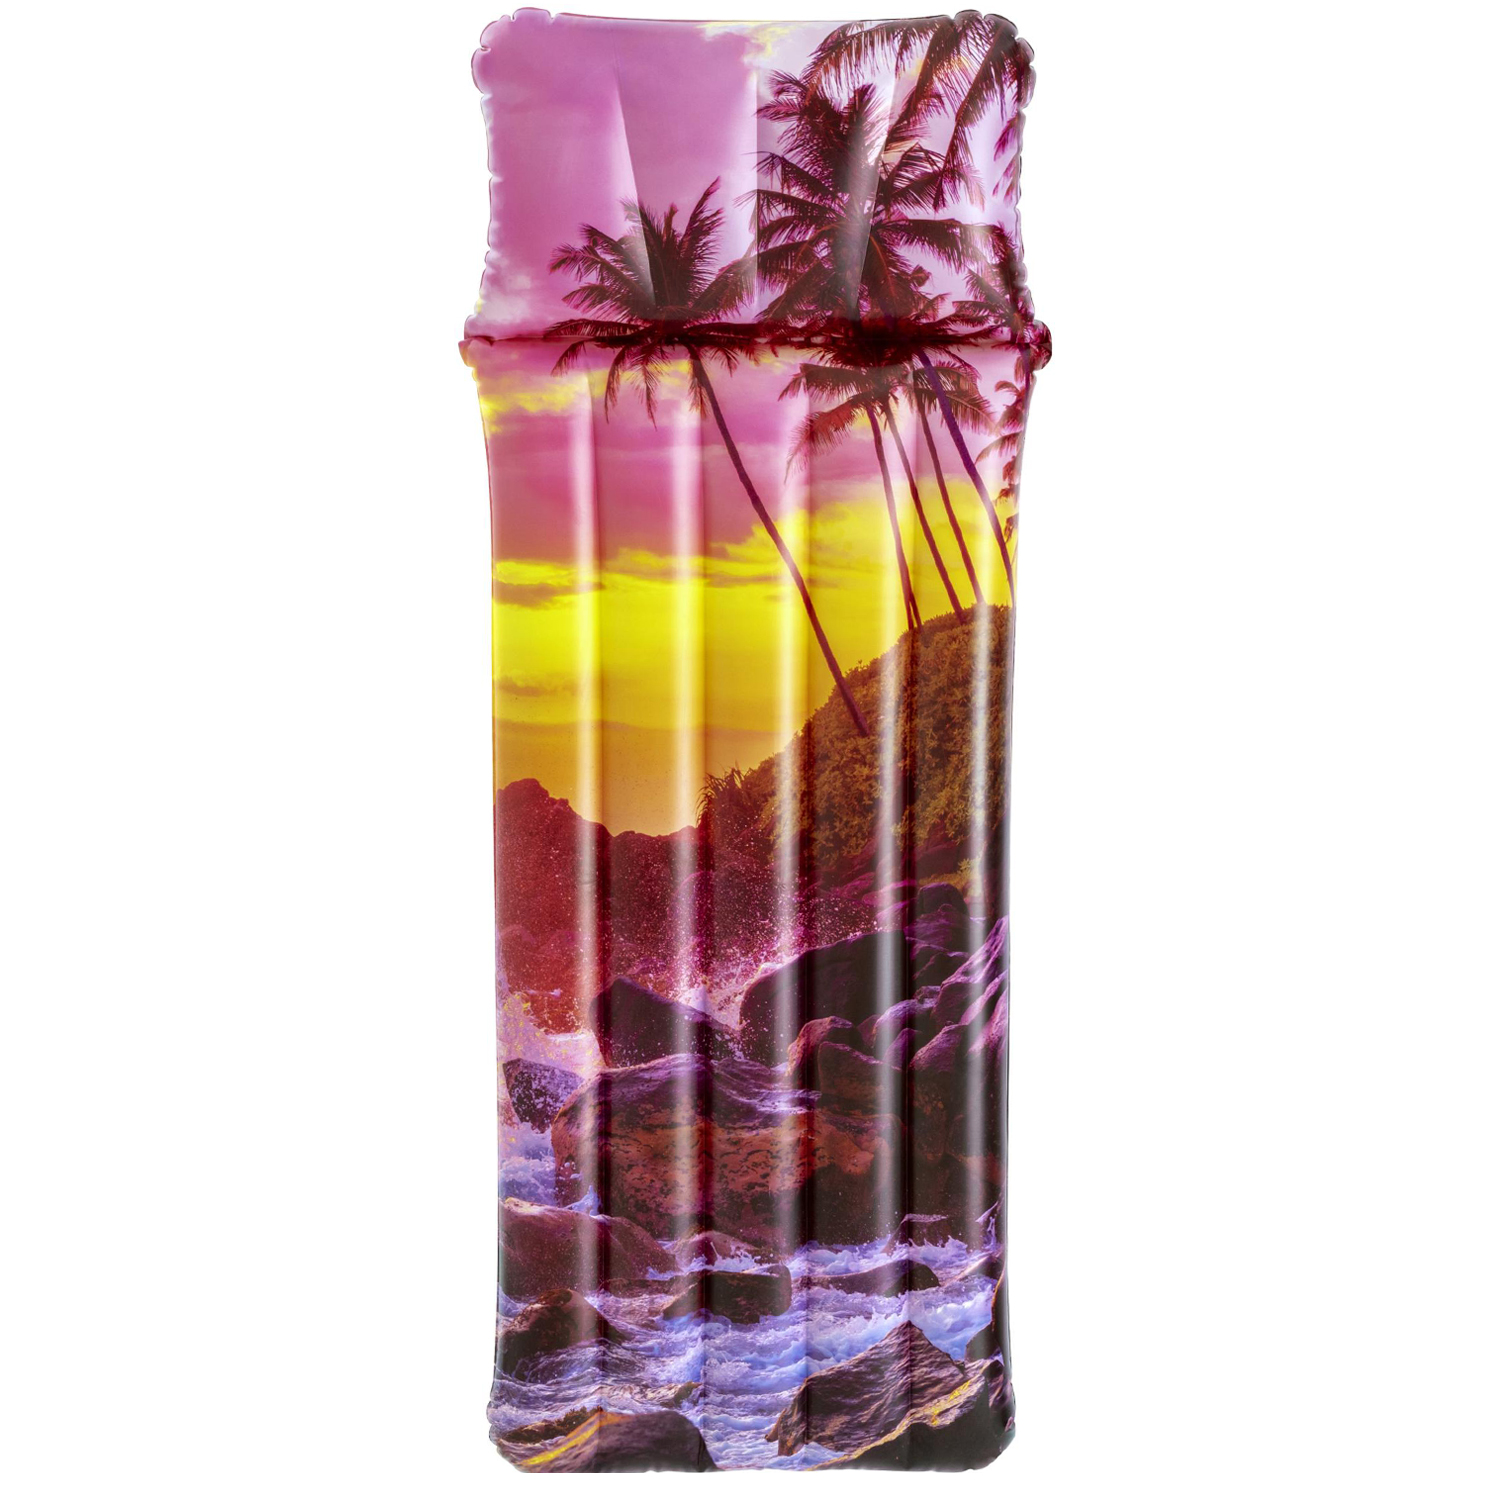 Inflatable floating lounge mat, 72" - Palm trees